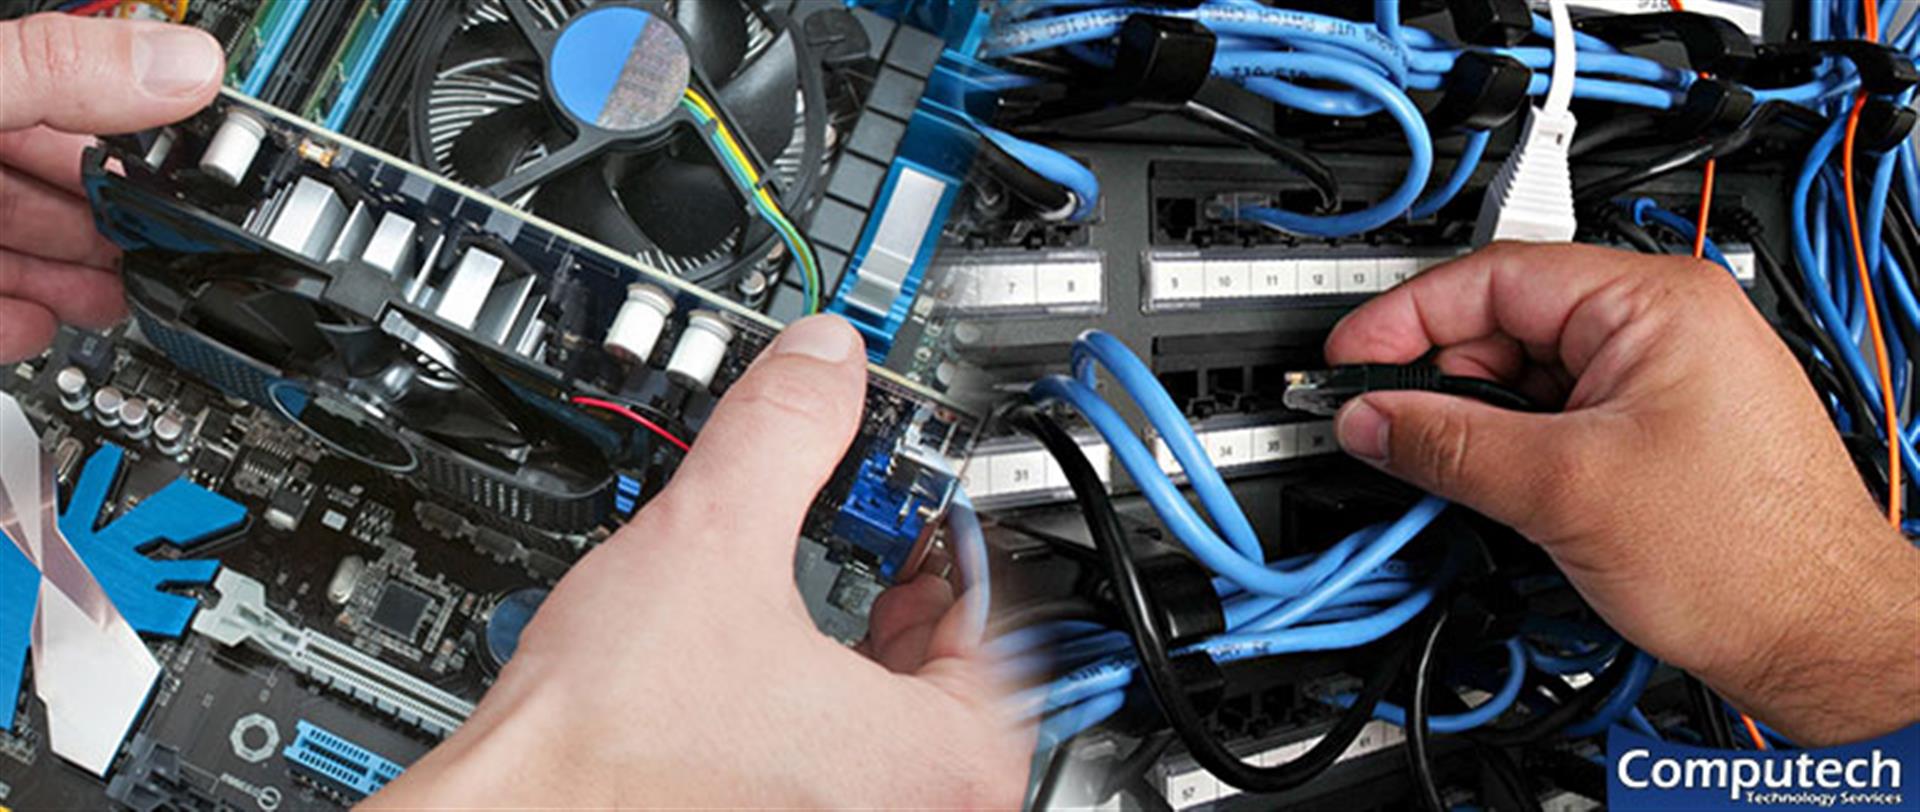 Port Wentworth Georgia On Site PC & Printer Repairs, Networking, Voice & Data Cabling Contractors